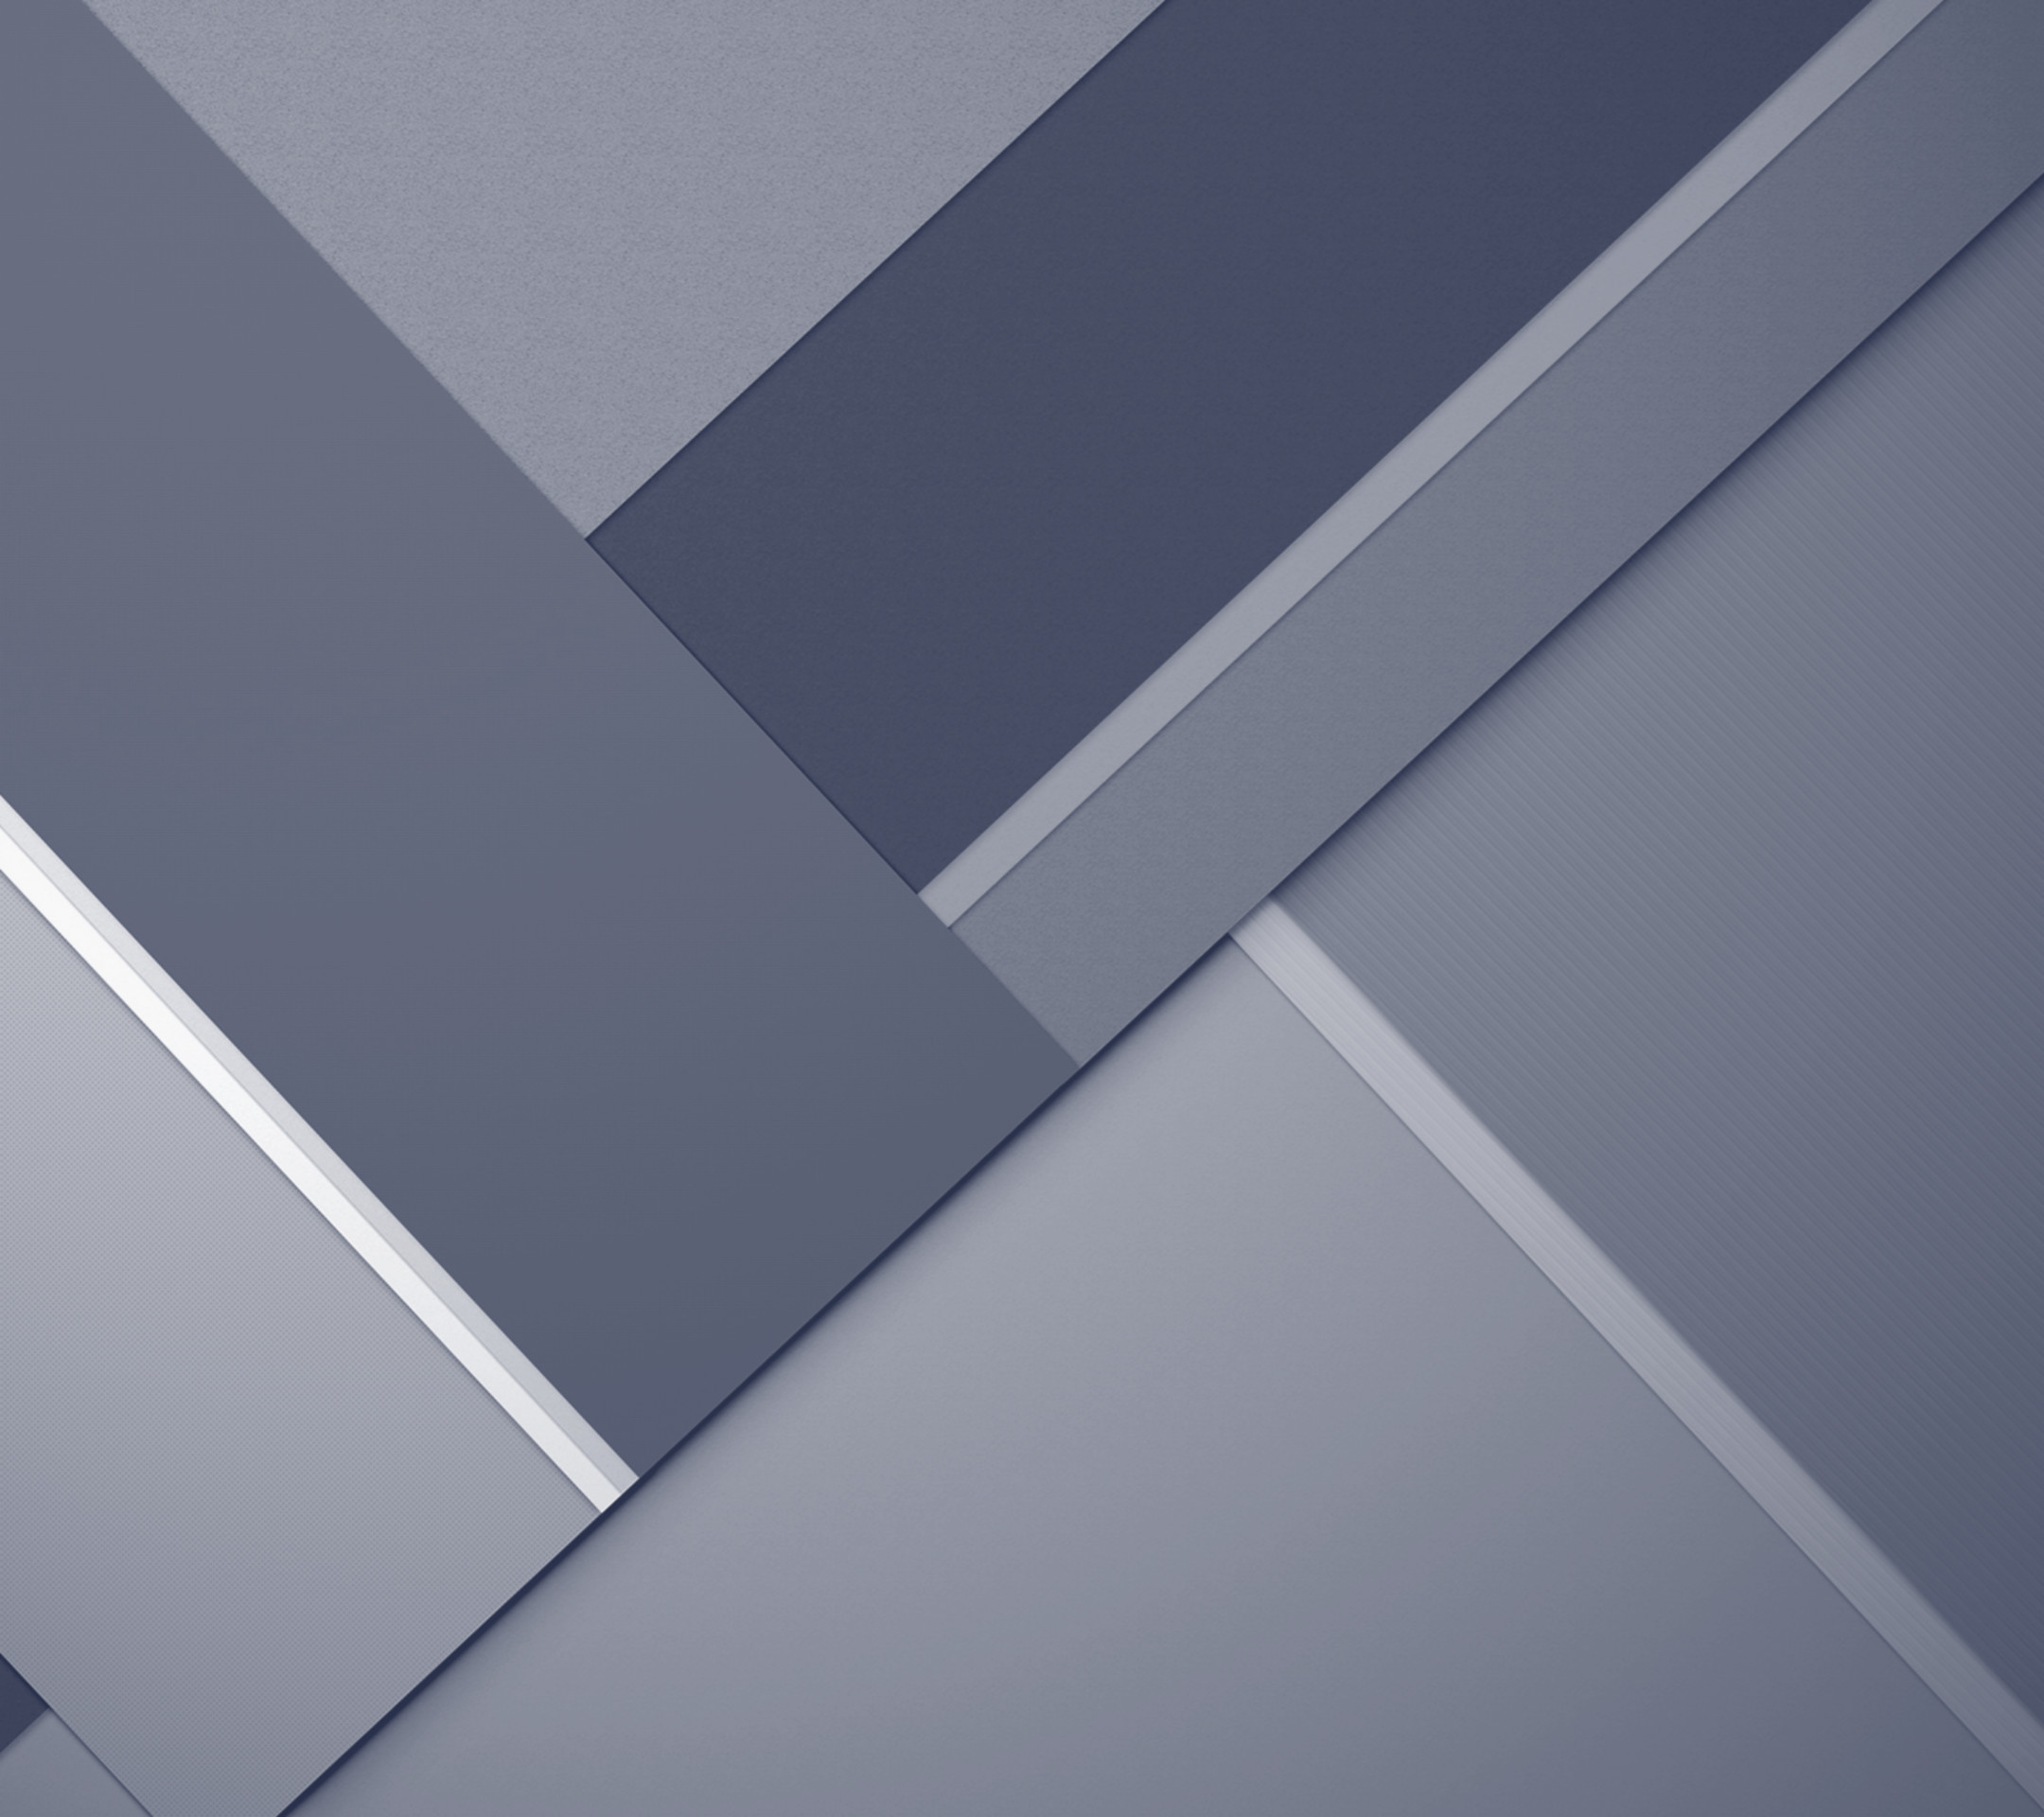 Simple Shapes Wallpaper (74+ images)